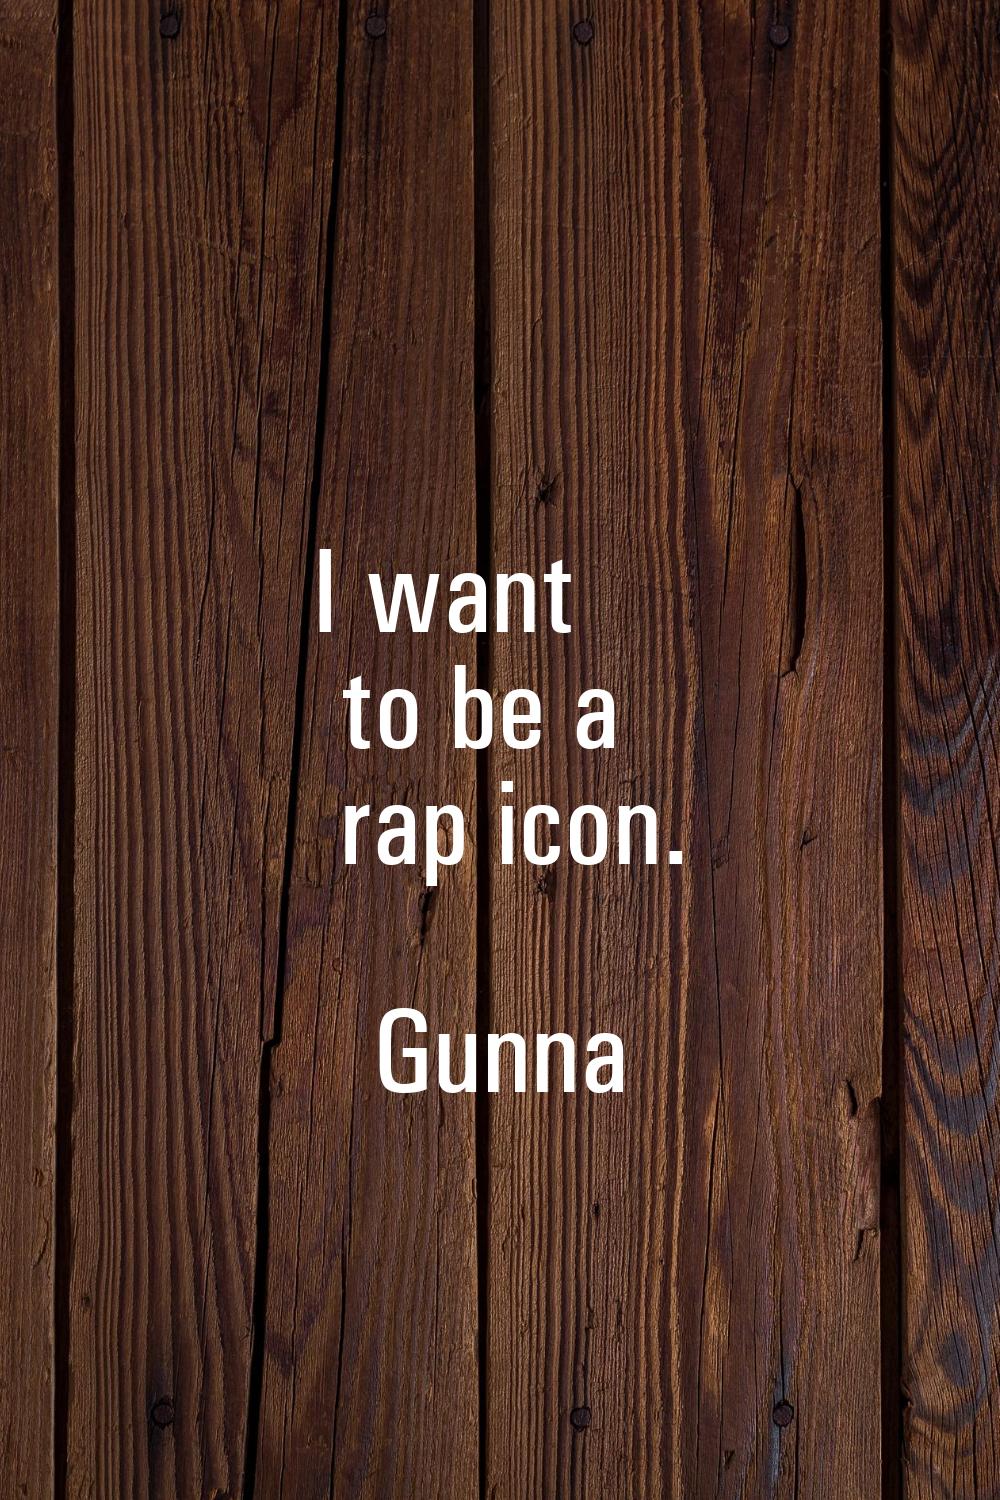 I want to be a rap icon.